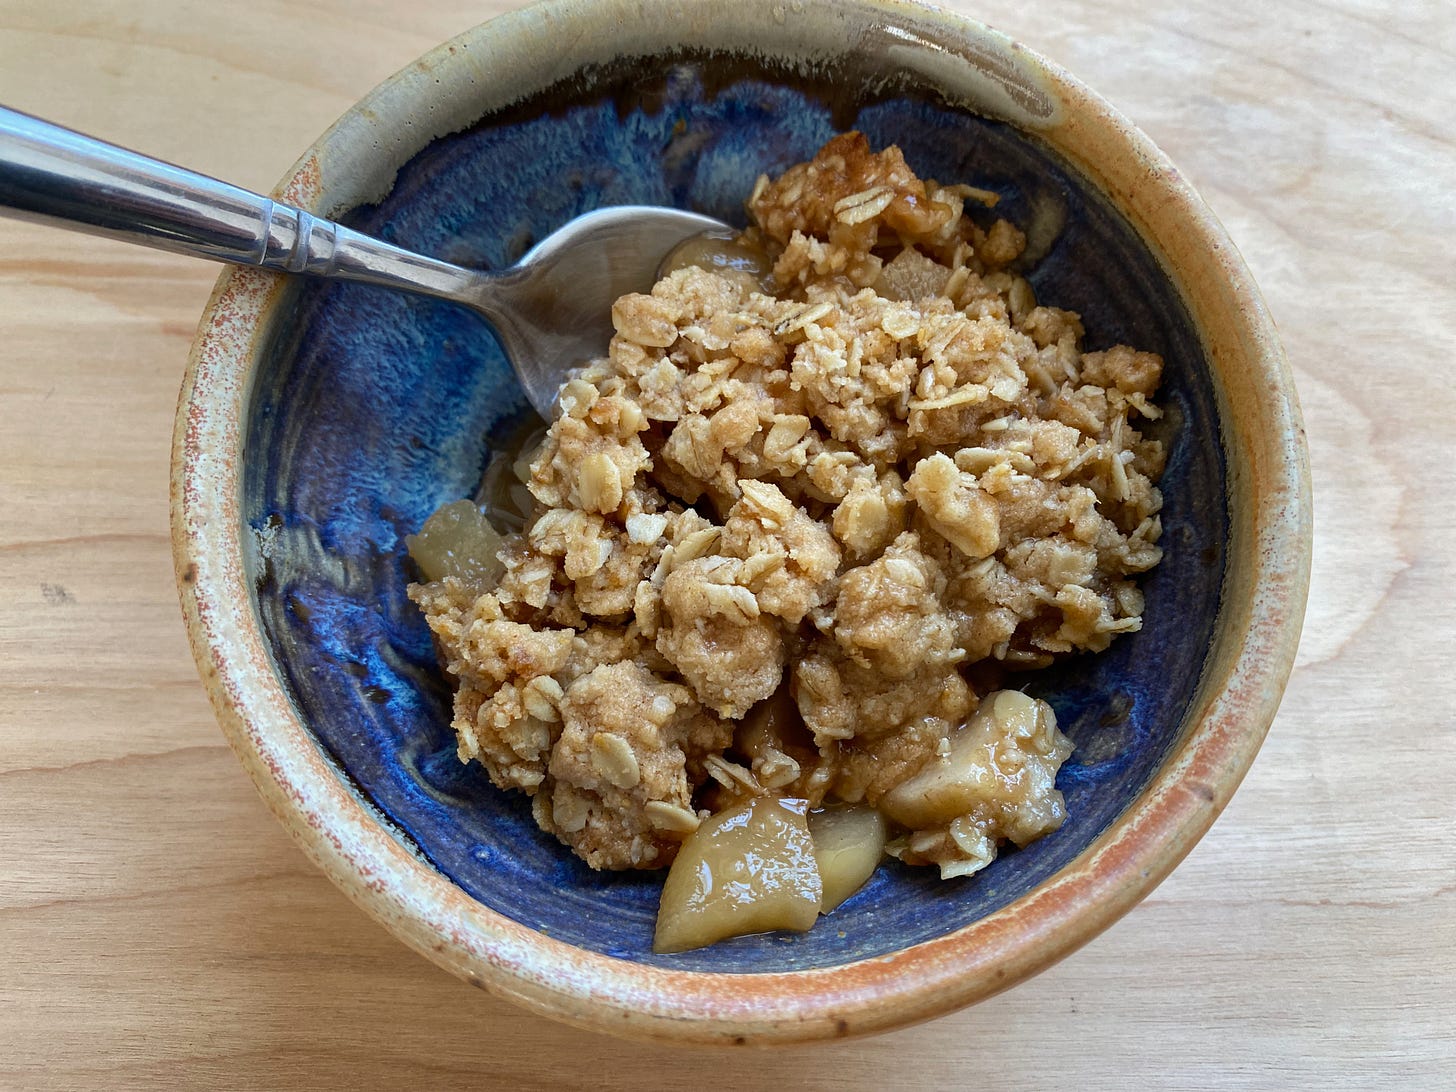 A small blue ceramic bowl of apple crisp with a spoon resting in it.